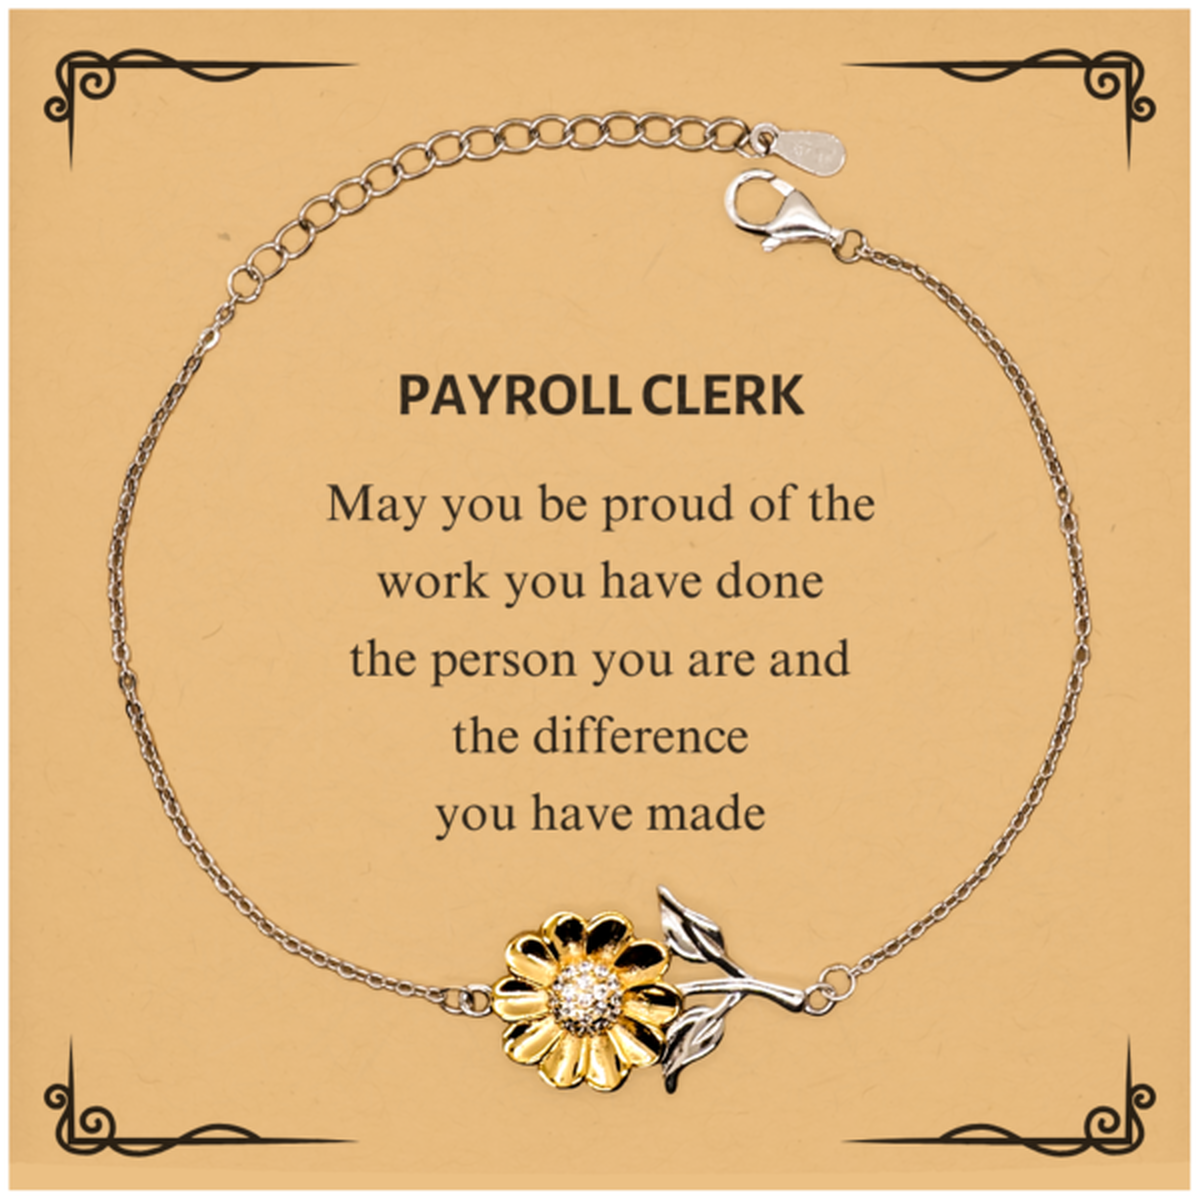 Payroll Clerk May you be proud of the work you have done, Retirement Payroll Clerk Sunflower Bracelet for Colleague Appreciation Gifts Amazing for Payroll Clerk